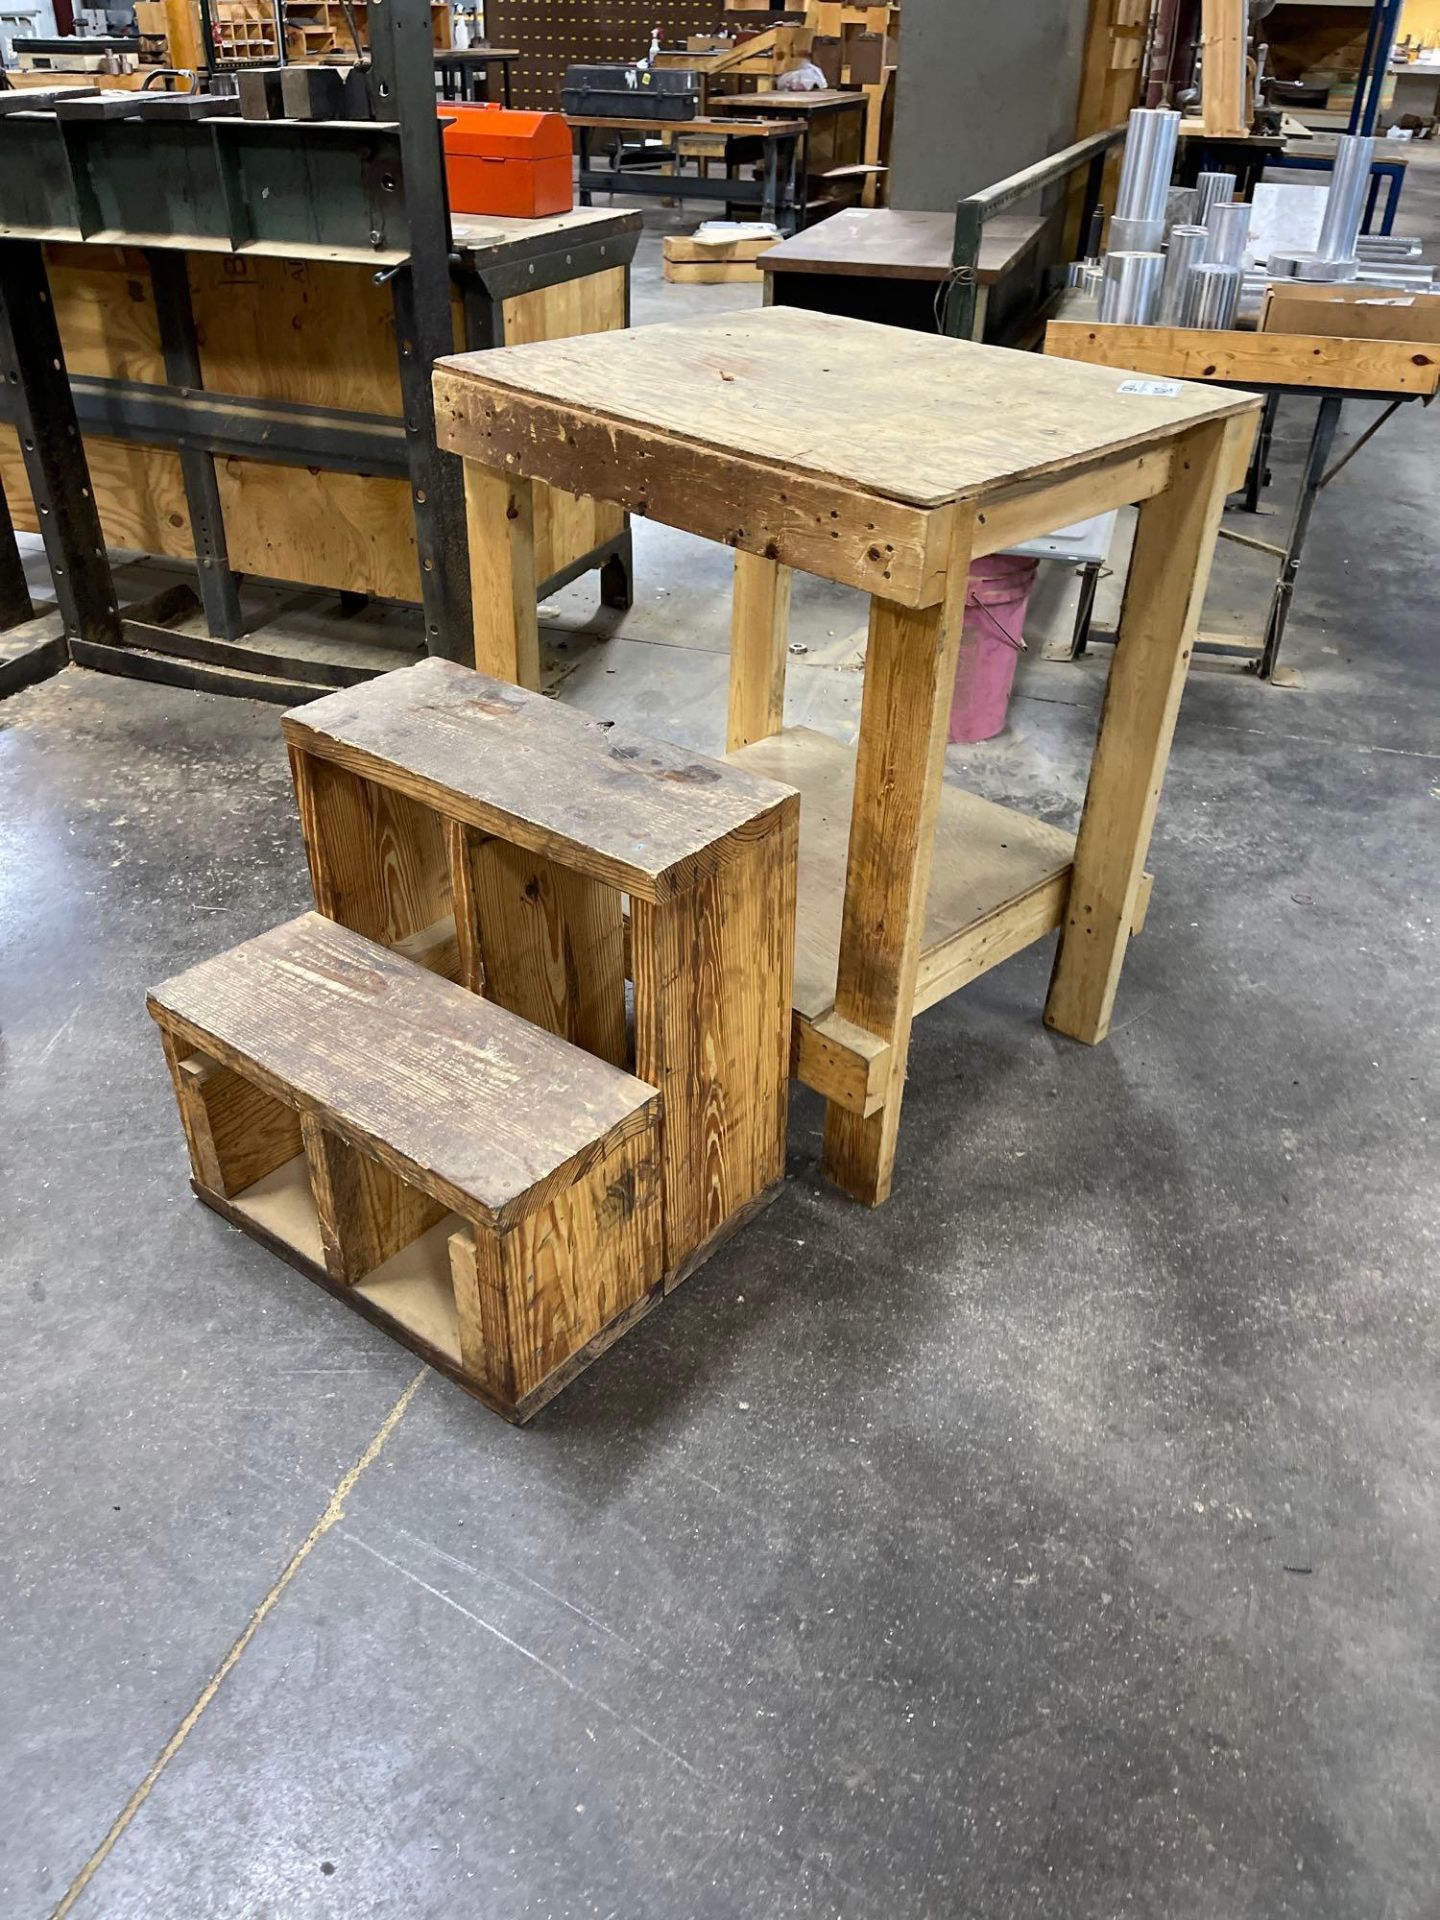 2-Tier Wood Work Bench w/ 2-step Stool - Image 4 of 4